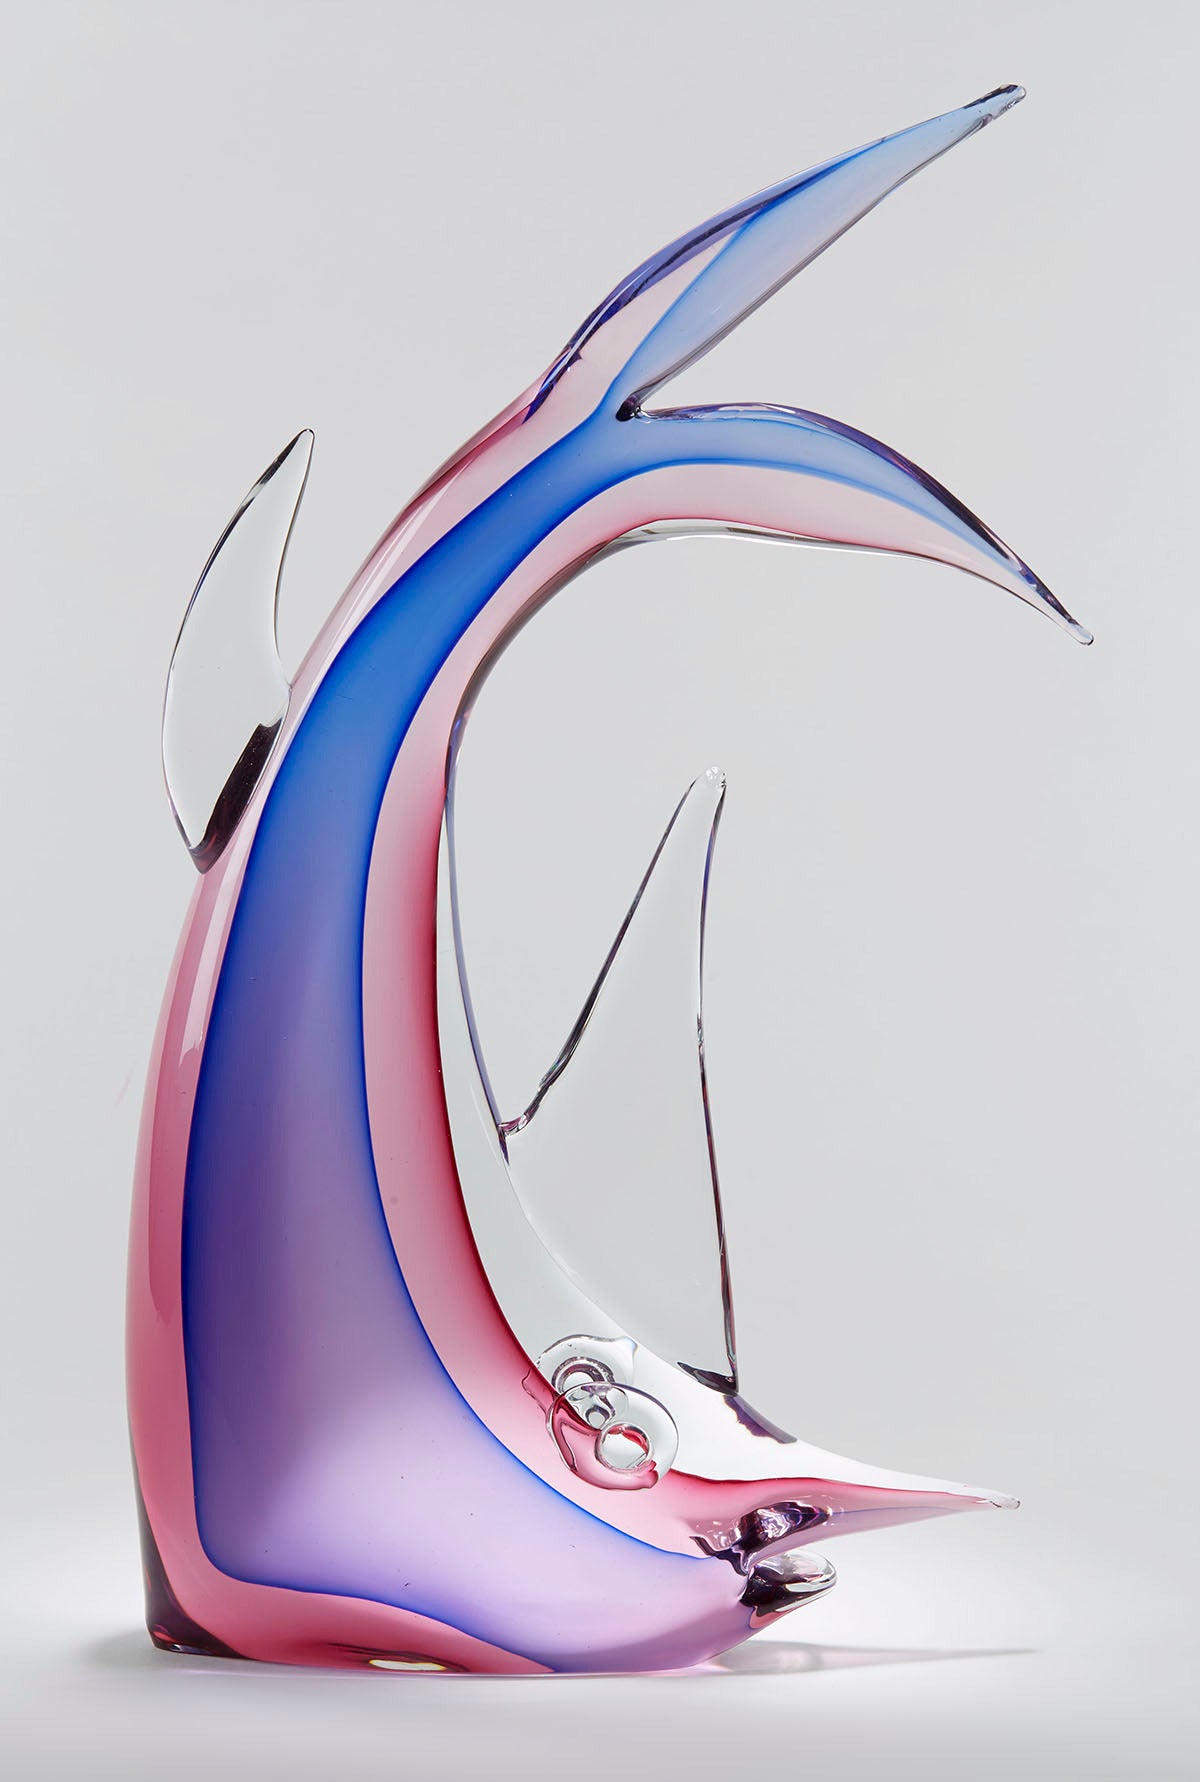 Murano handblown Sommerso art glass leaping marlin fish sculpture with a central purple with a pink halo inclusion within a heavily made clear glass body. The fish has applied fins and formed mouth and applied eyes and has a flat polished base and